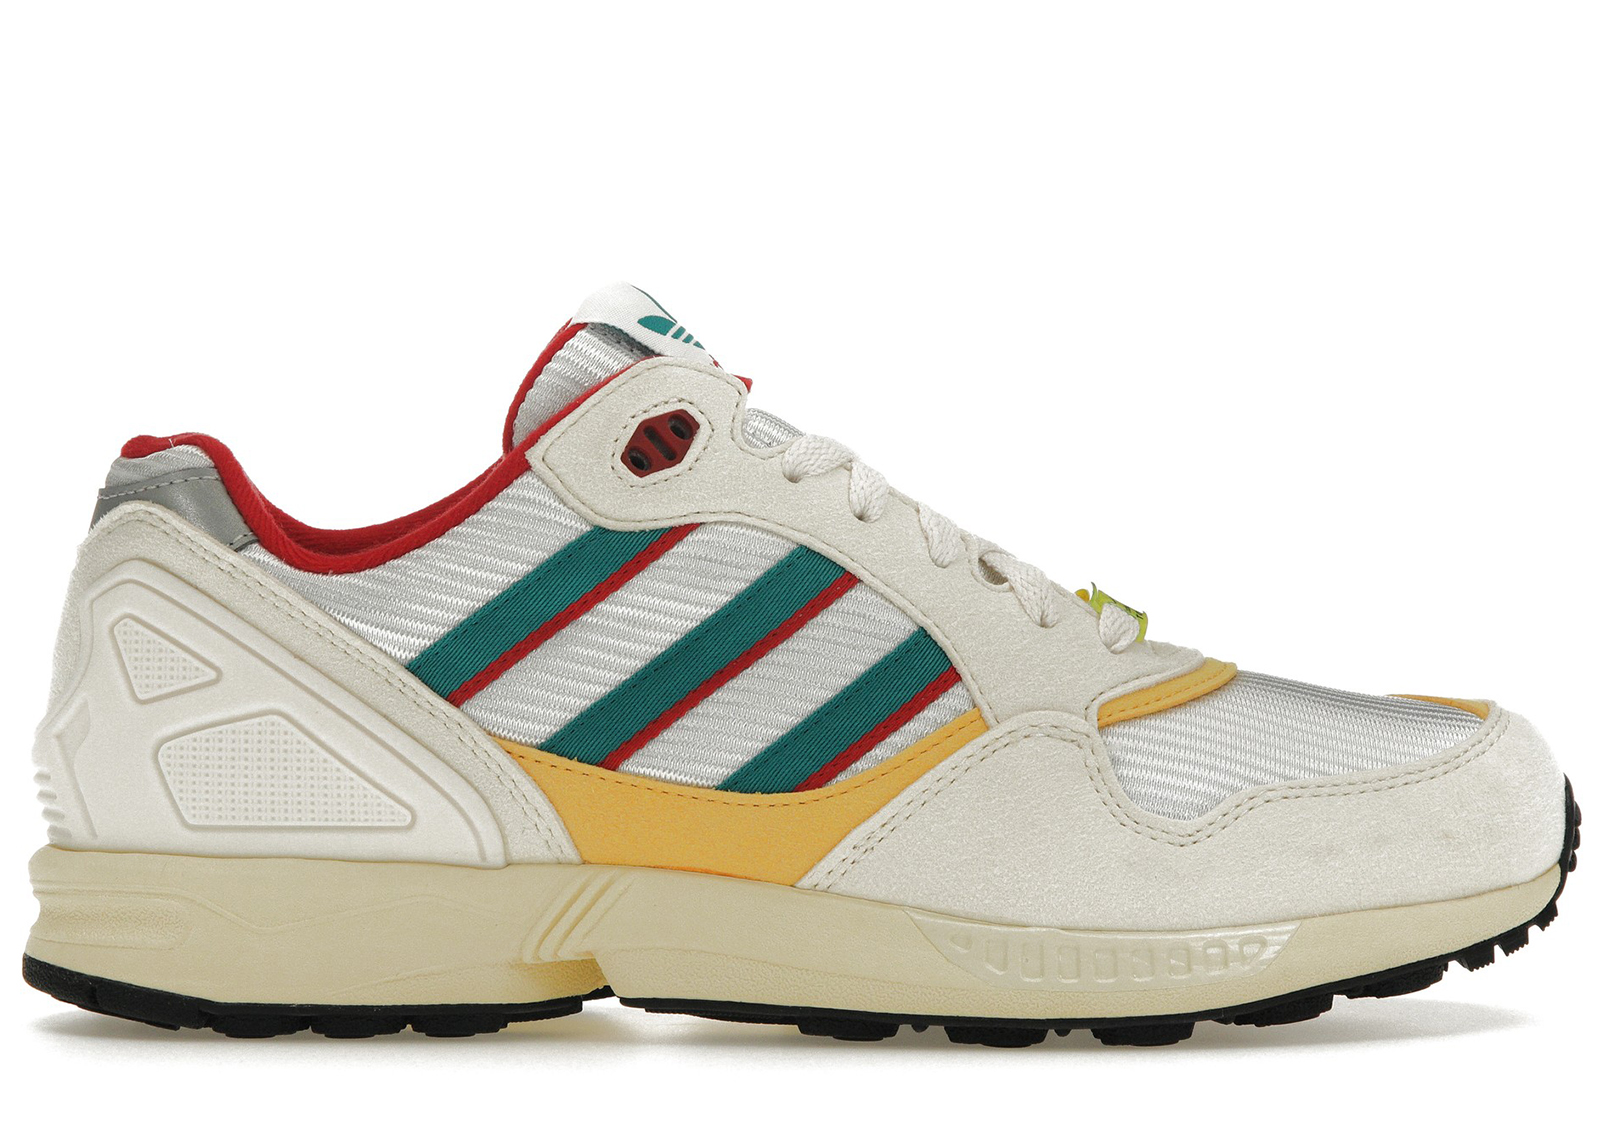 adidas ZX 5000 30 Years of Torsion Men's - FU8406 - US